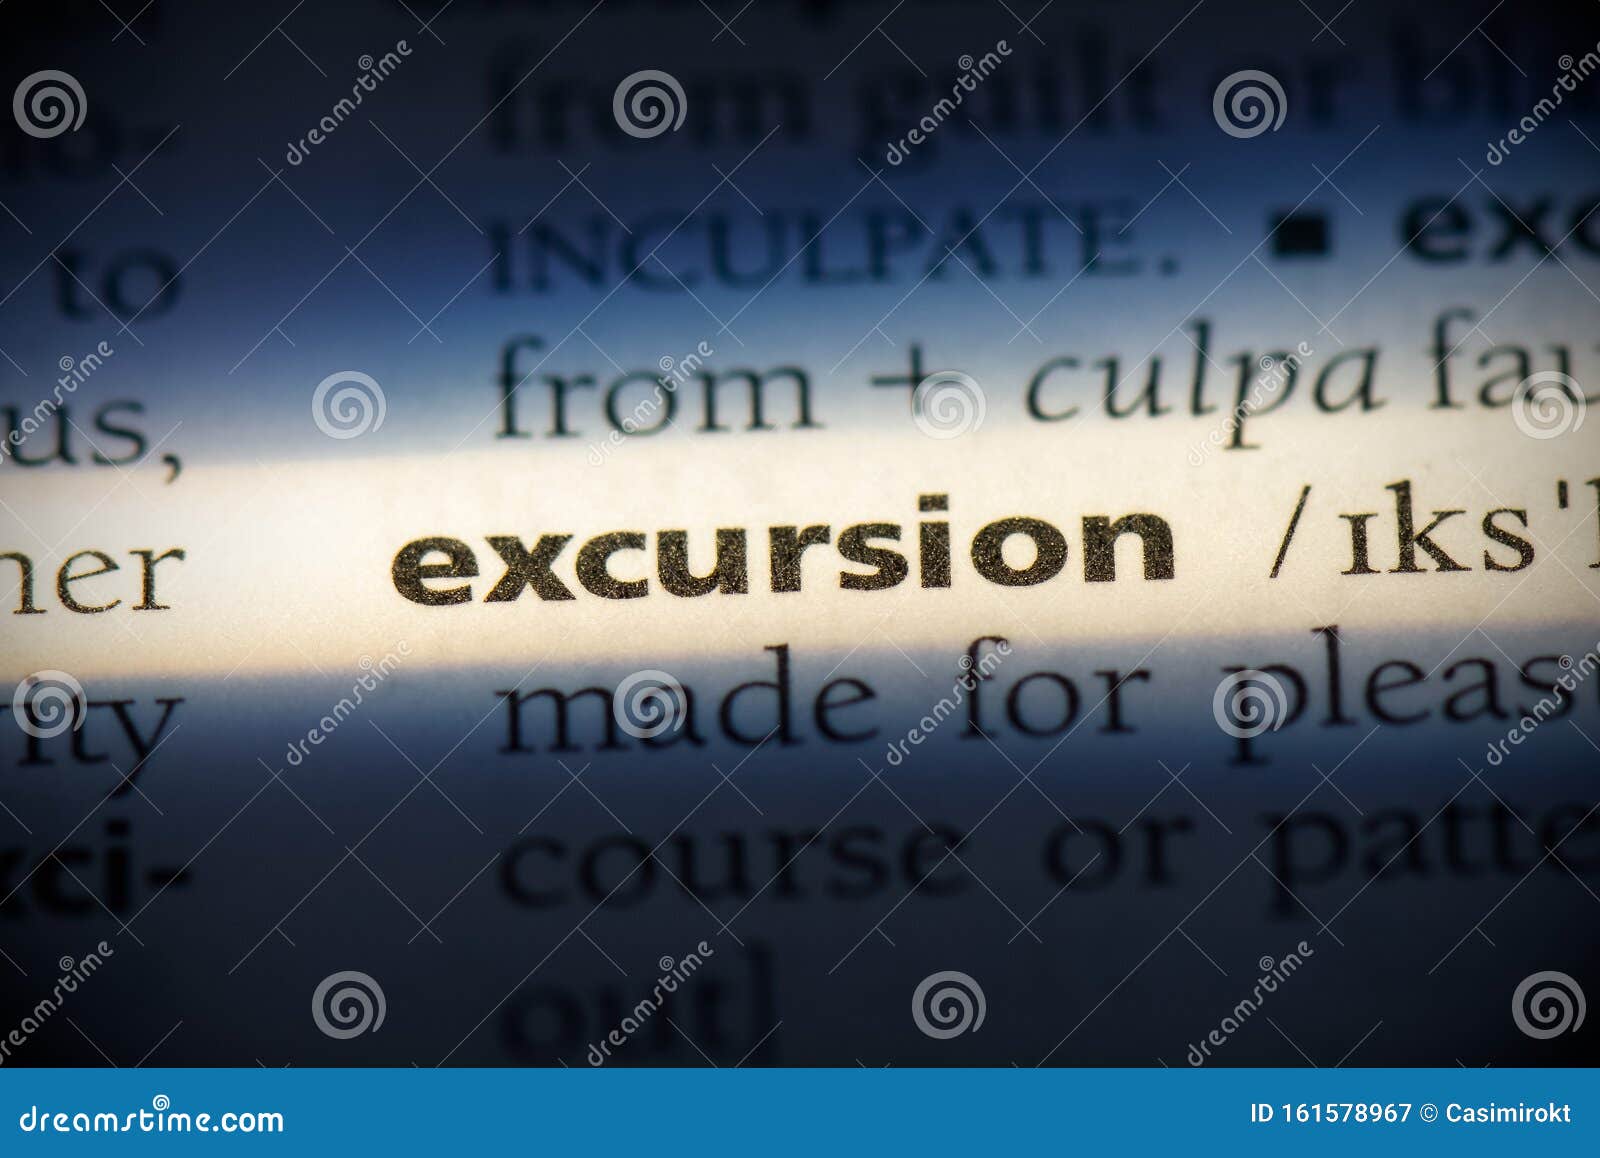 excursion definition oxford dictionary